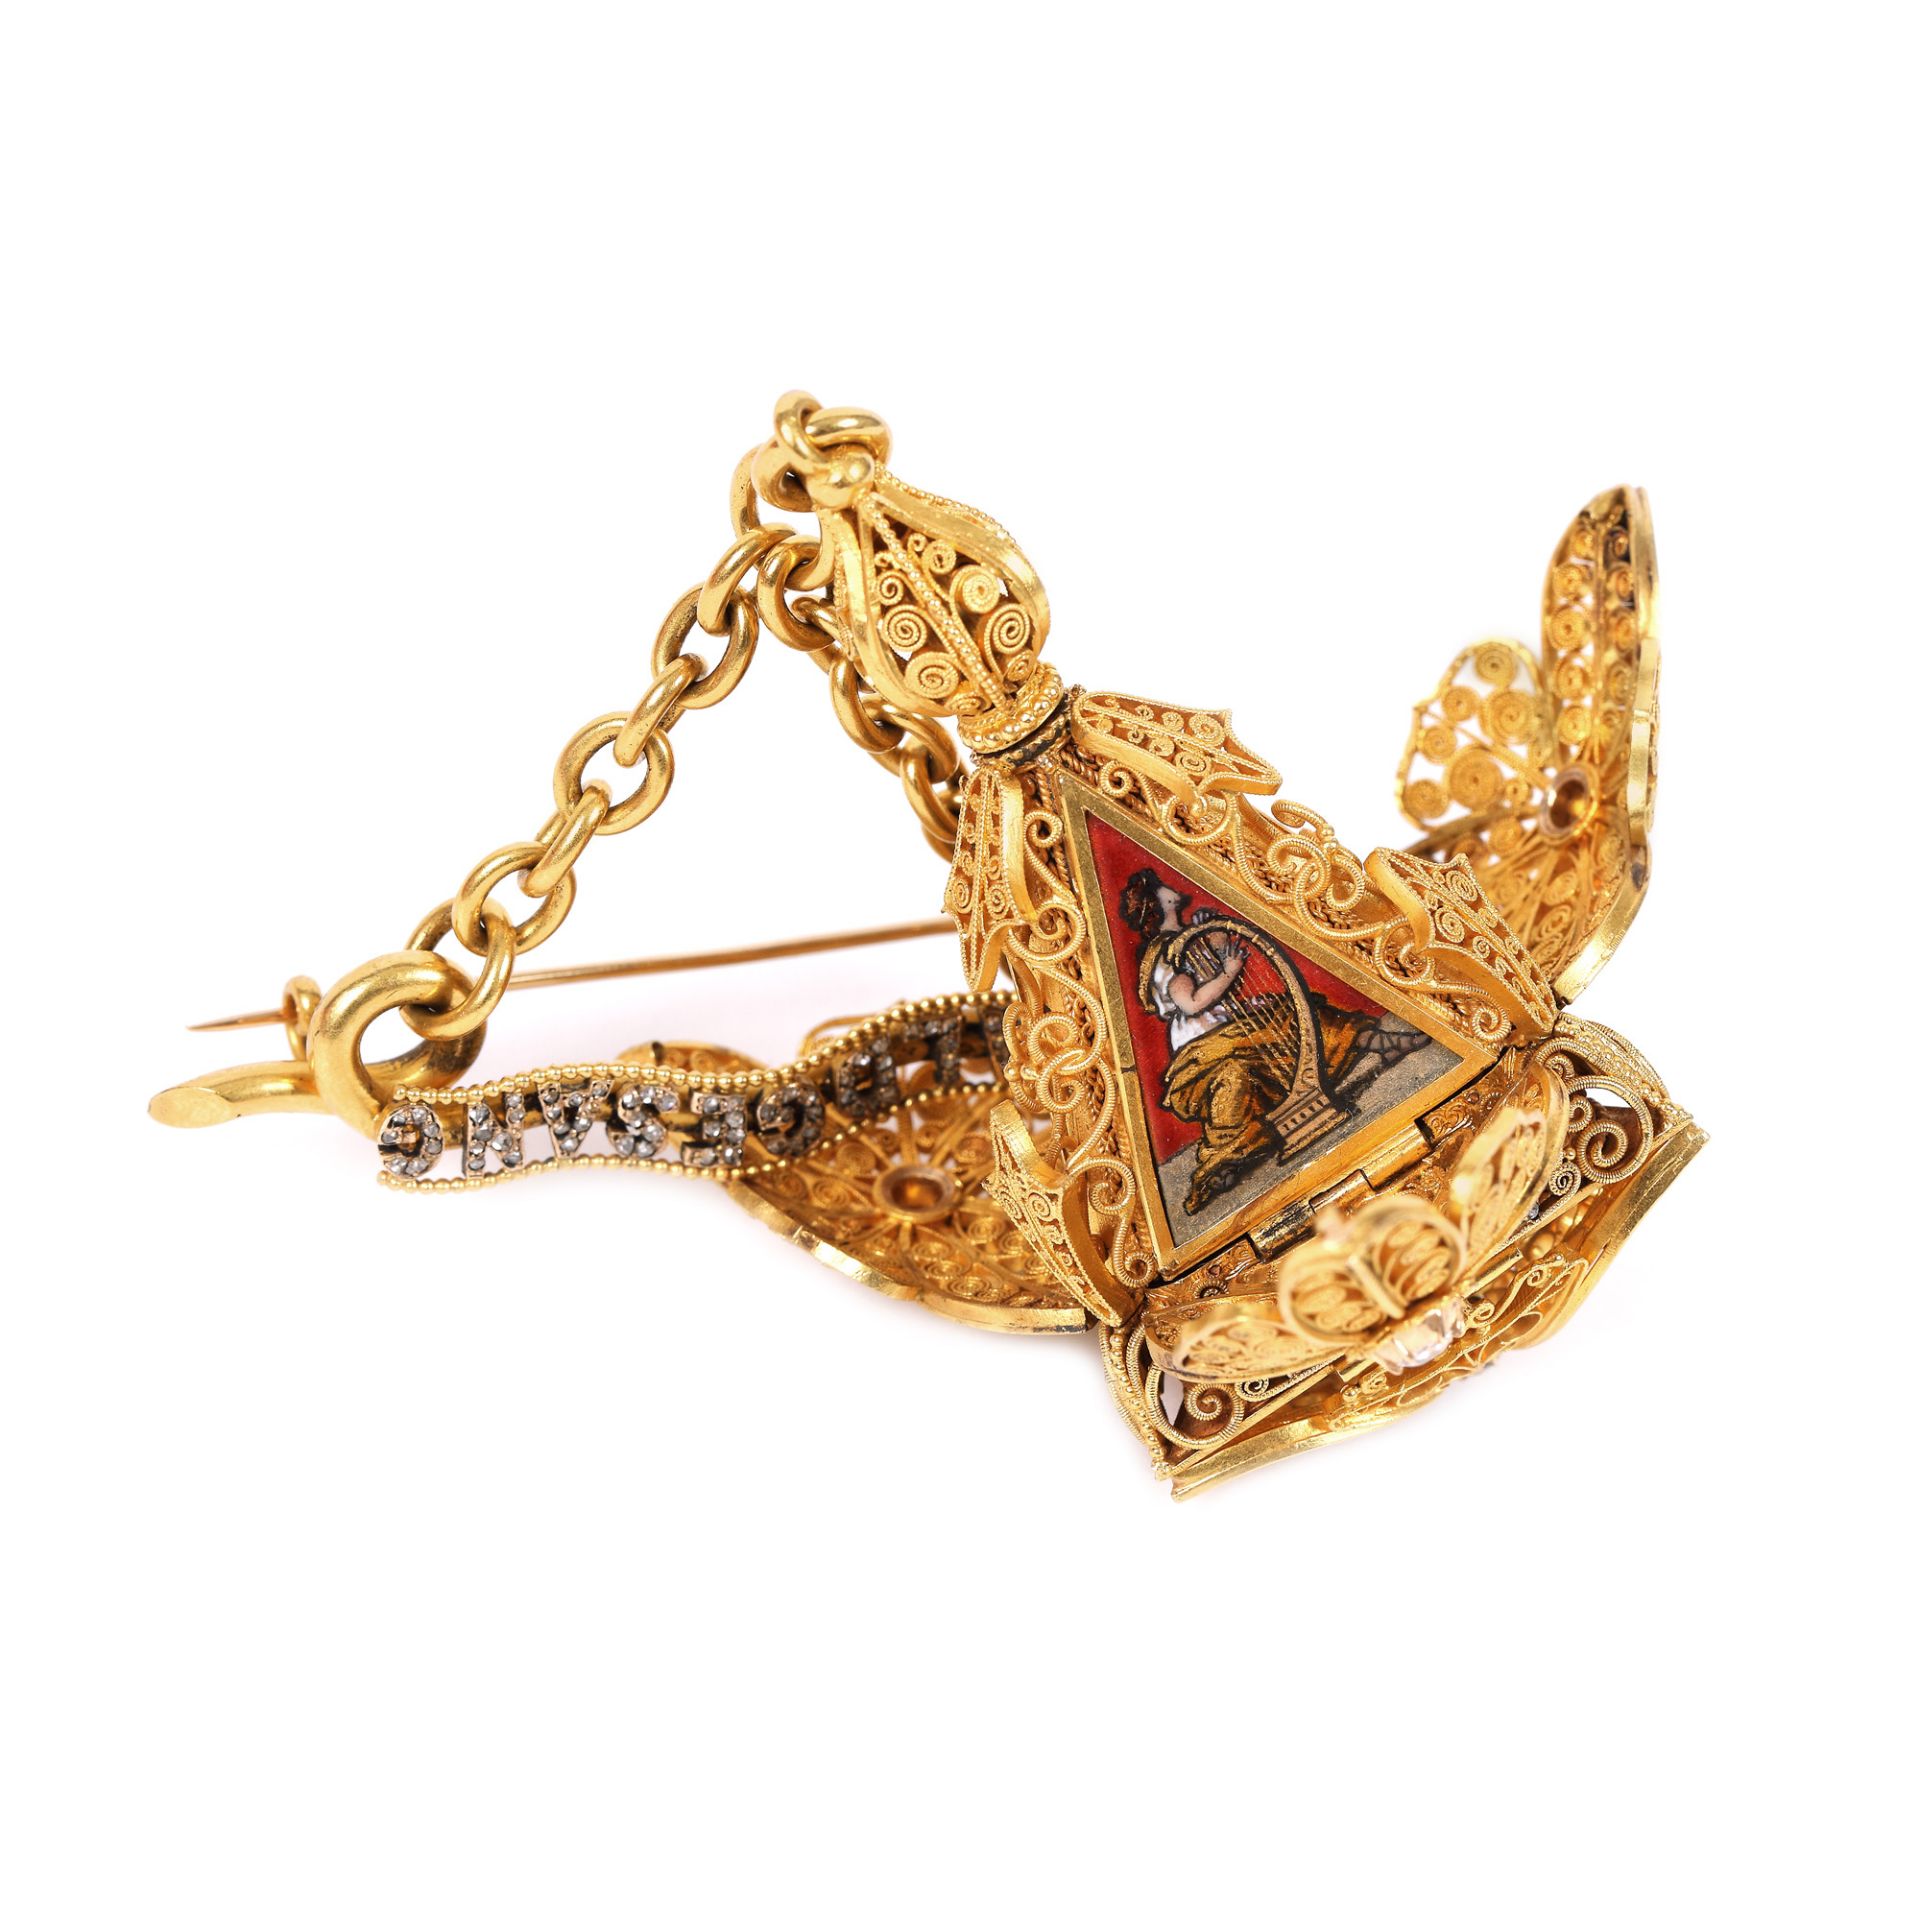 A very rare clock with chain, in the form of a flower made of filigreed gold, adorned with diamonds - Image 10 of 10